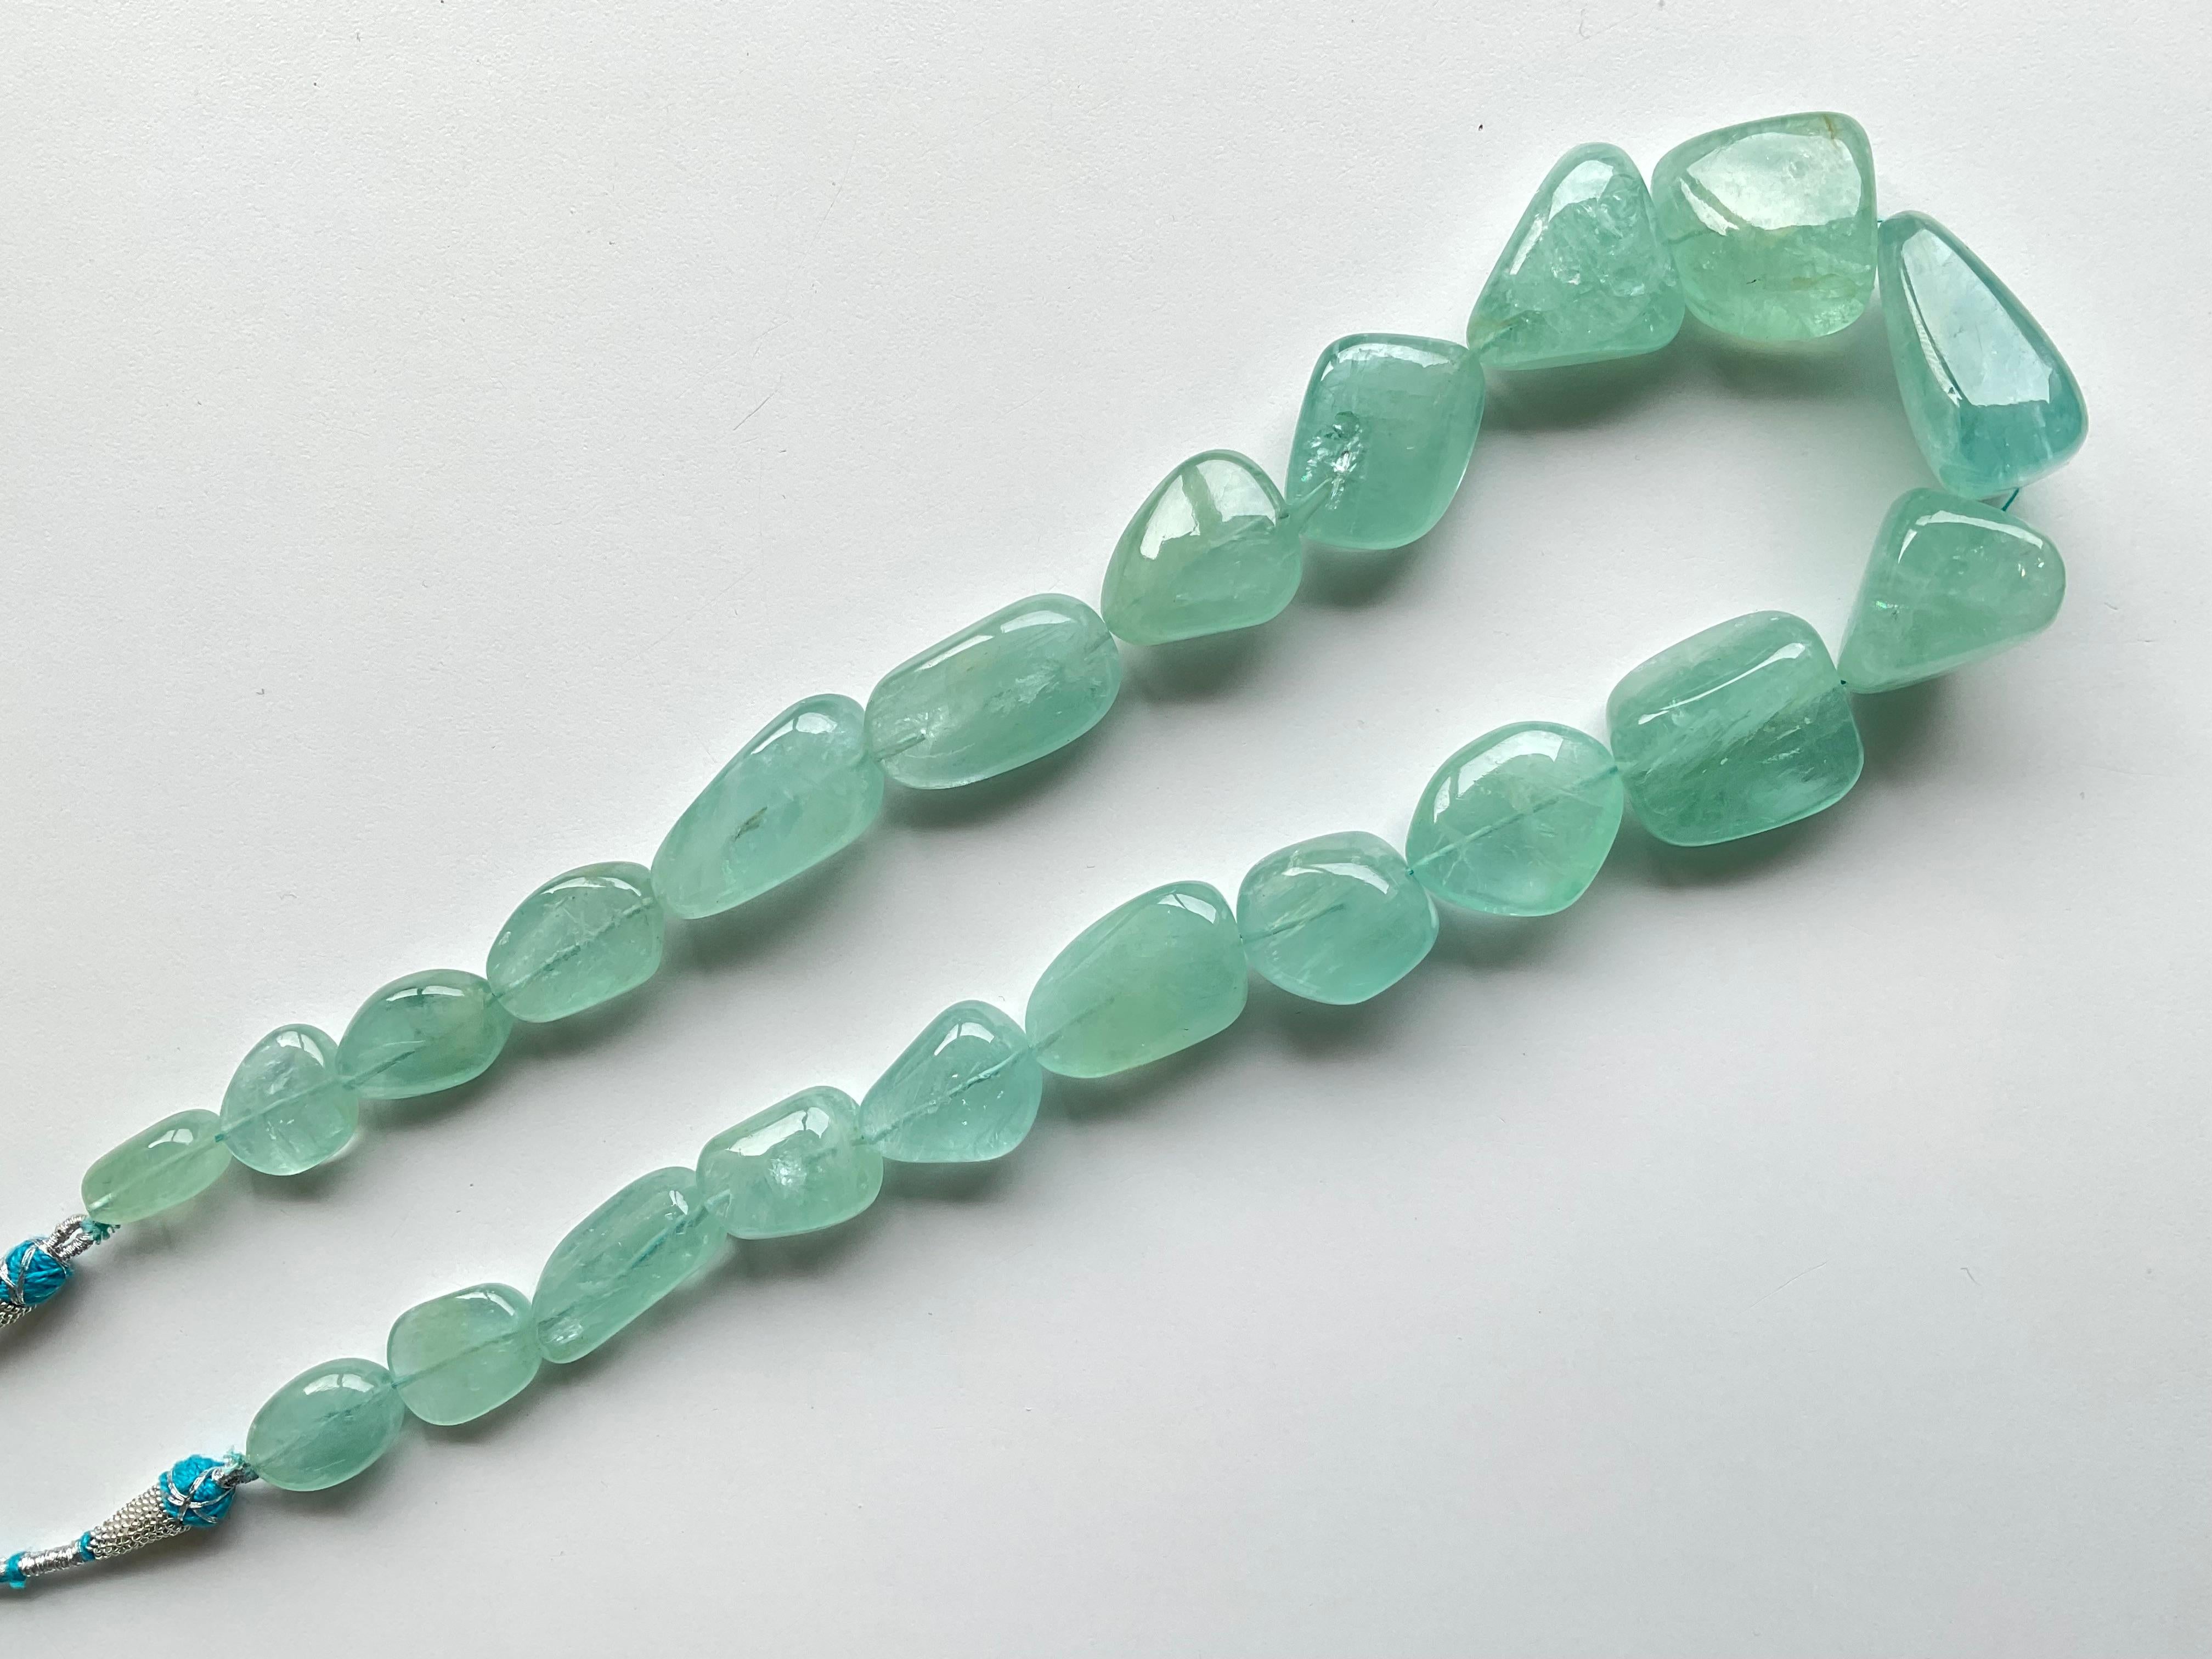 959.80 Carats Aquamarine Necklace Tumbled Plain Top Quality Natural Gemstone For Sale 1